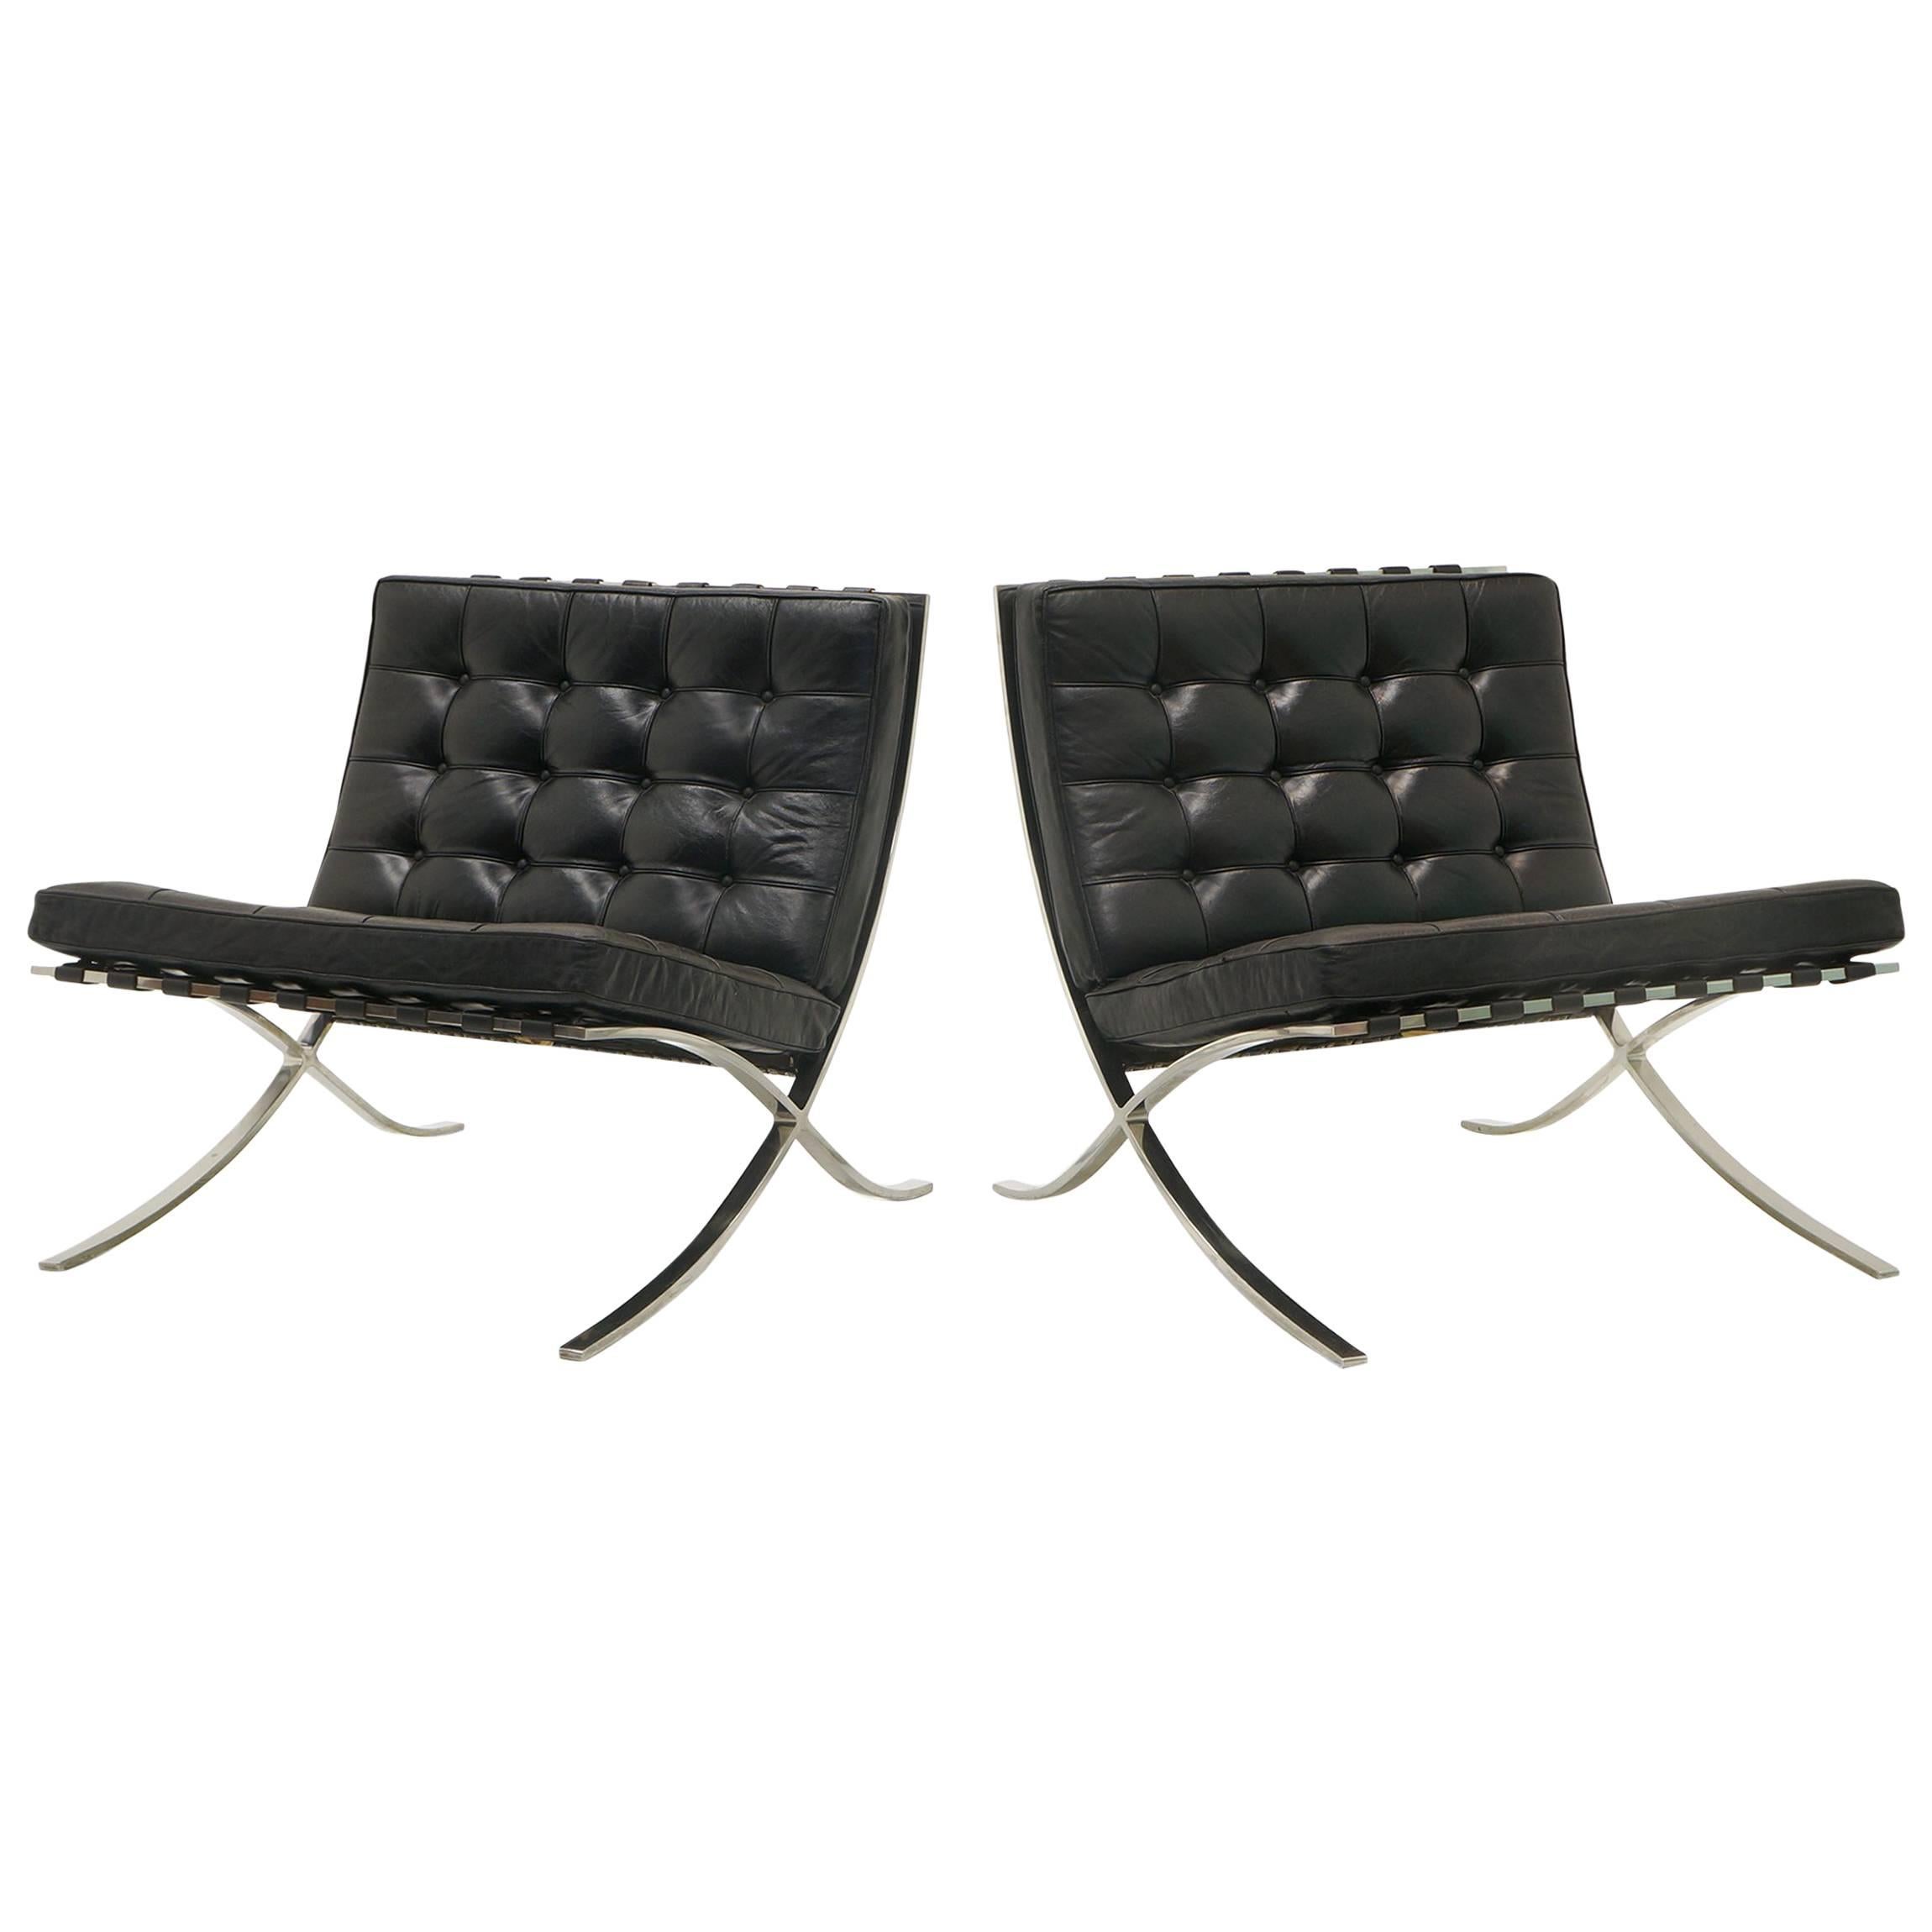 Pair of Barcelona Chairs, Early Knoll Production, Stainless and Black Leather